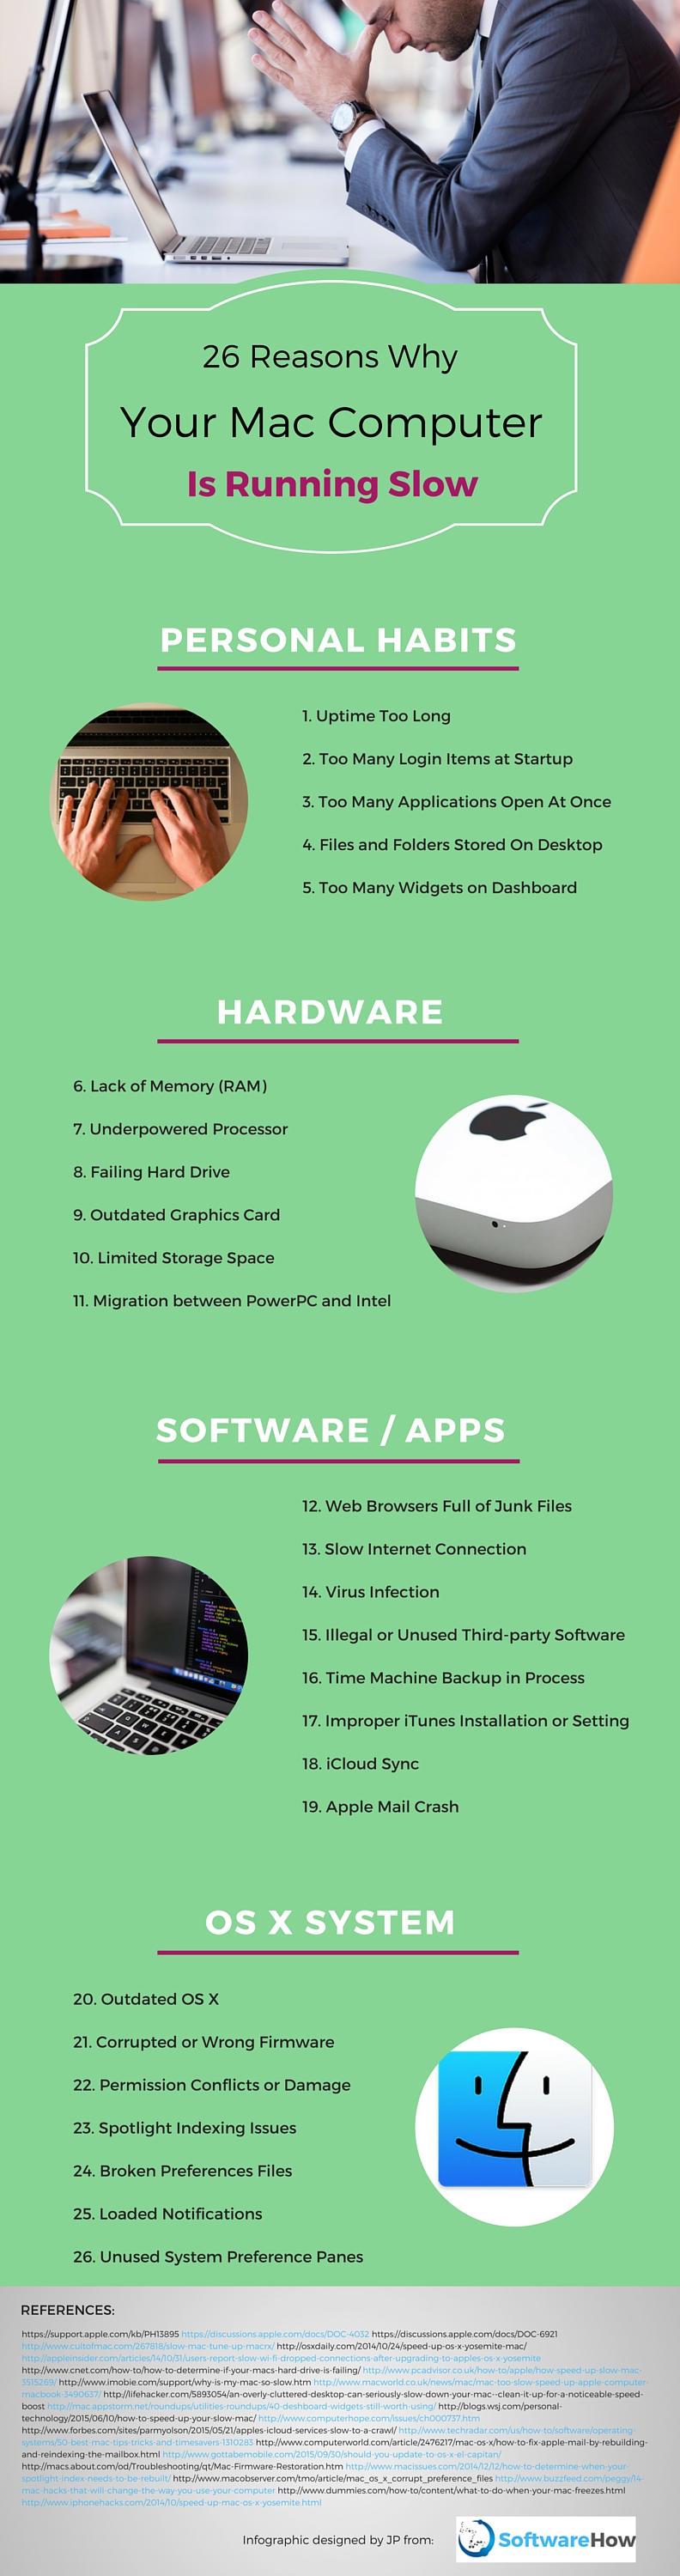 26 Reasons Why Your Mac May be Running Slow (Infographic)